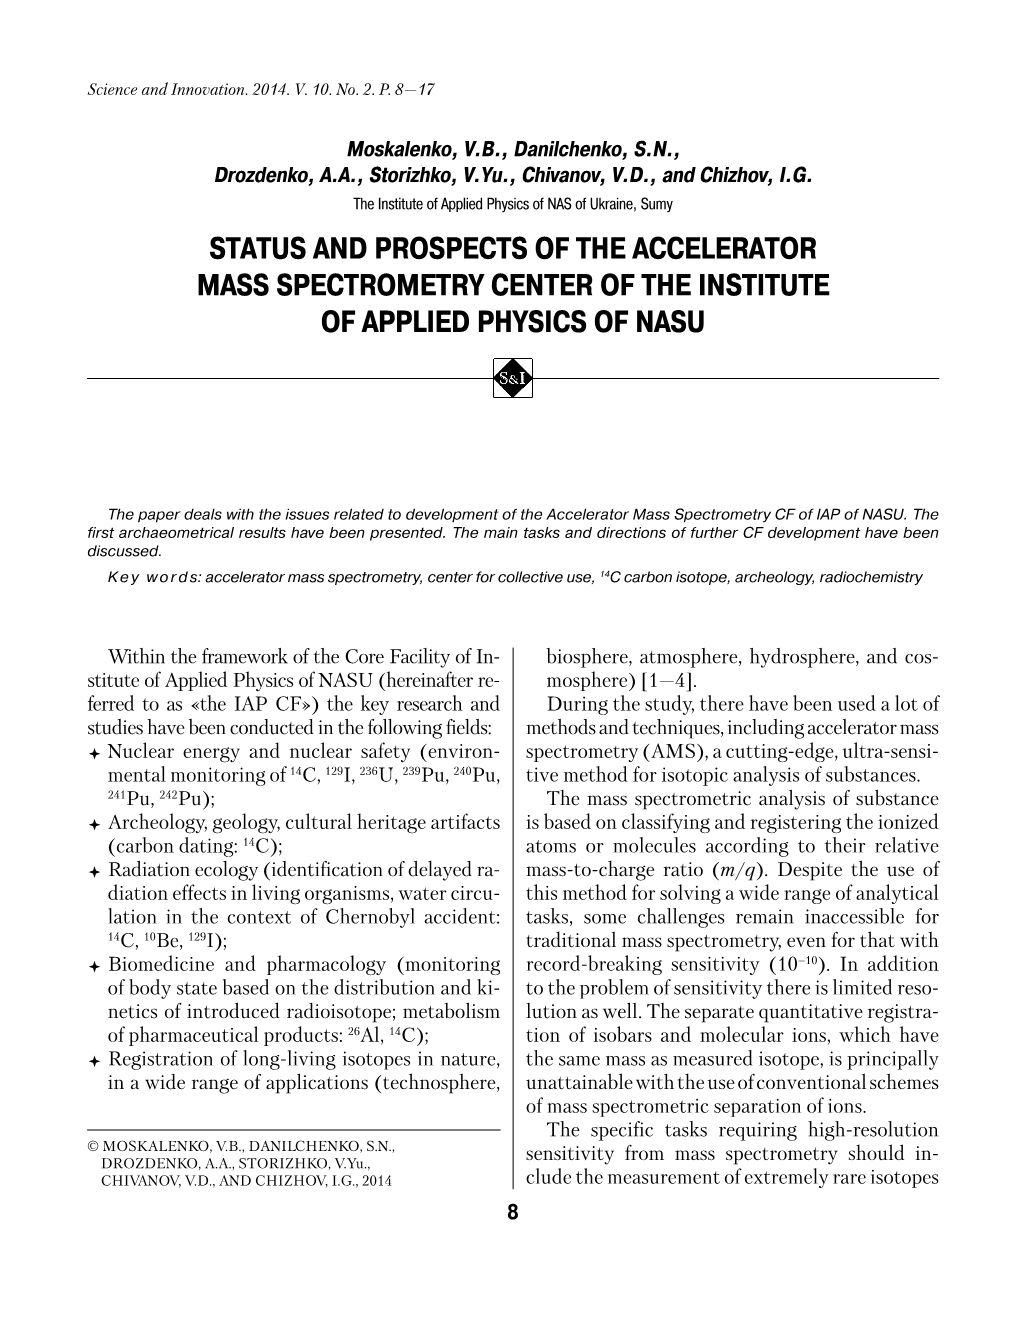 Status and Prospects of the Accelerator Mass Spectrometry Center of the Institute of Applied Physics of Nasu